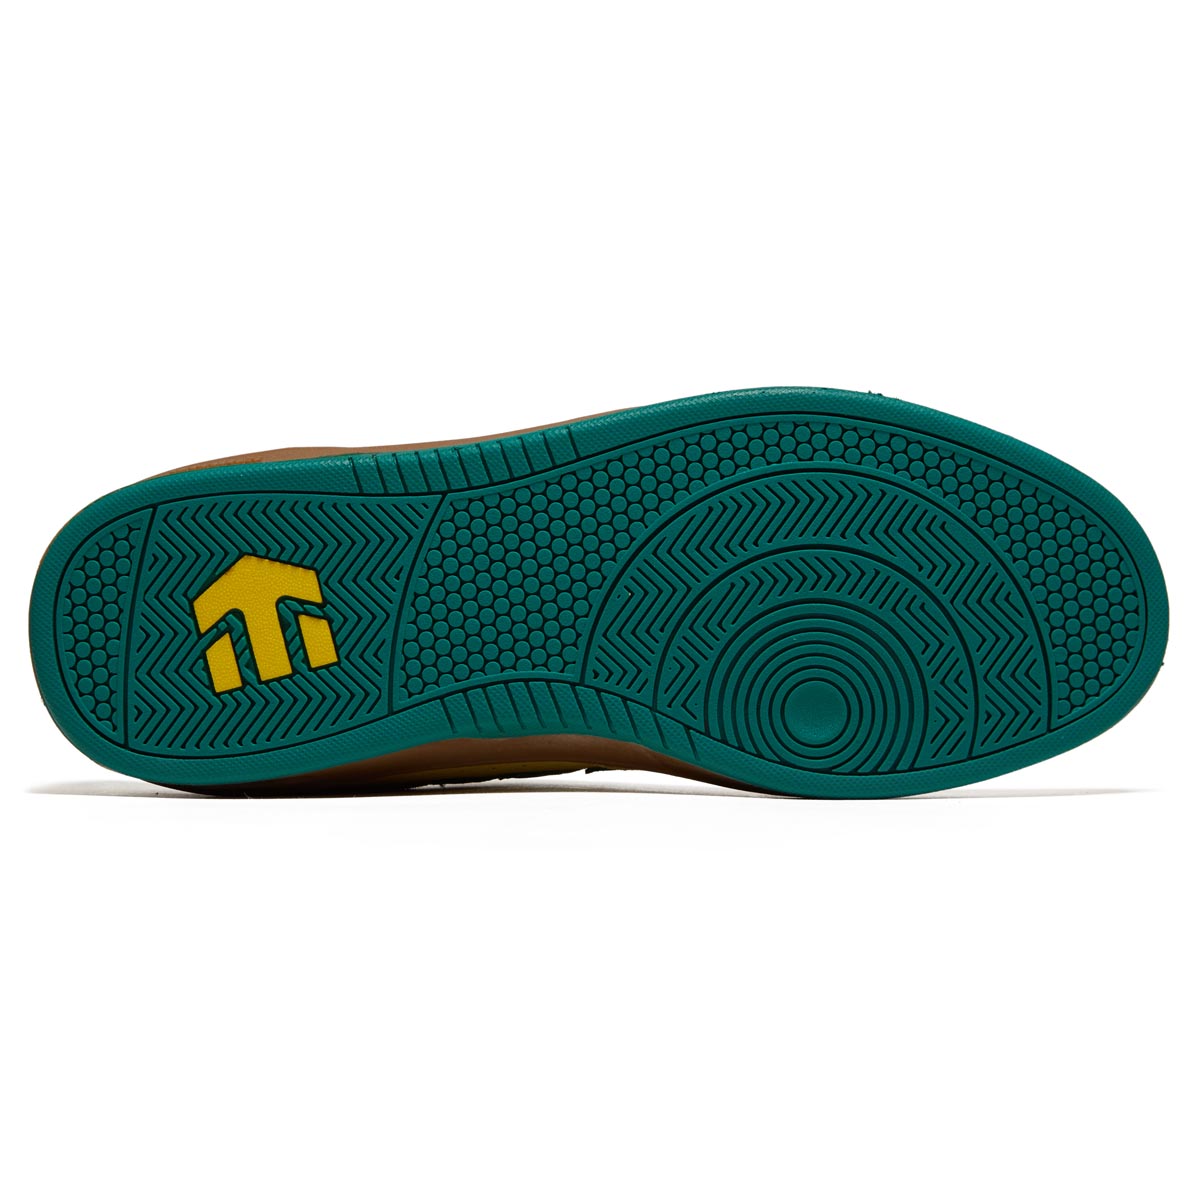 Etnies Windrow Shoes - Yellow image 4